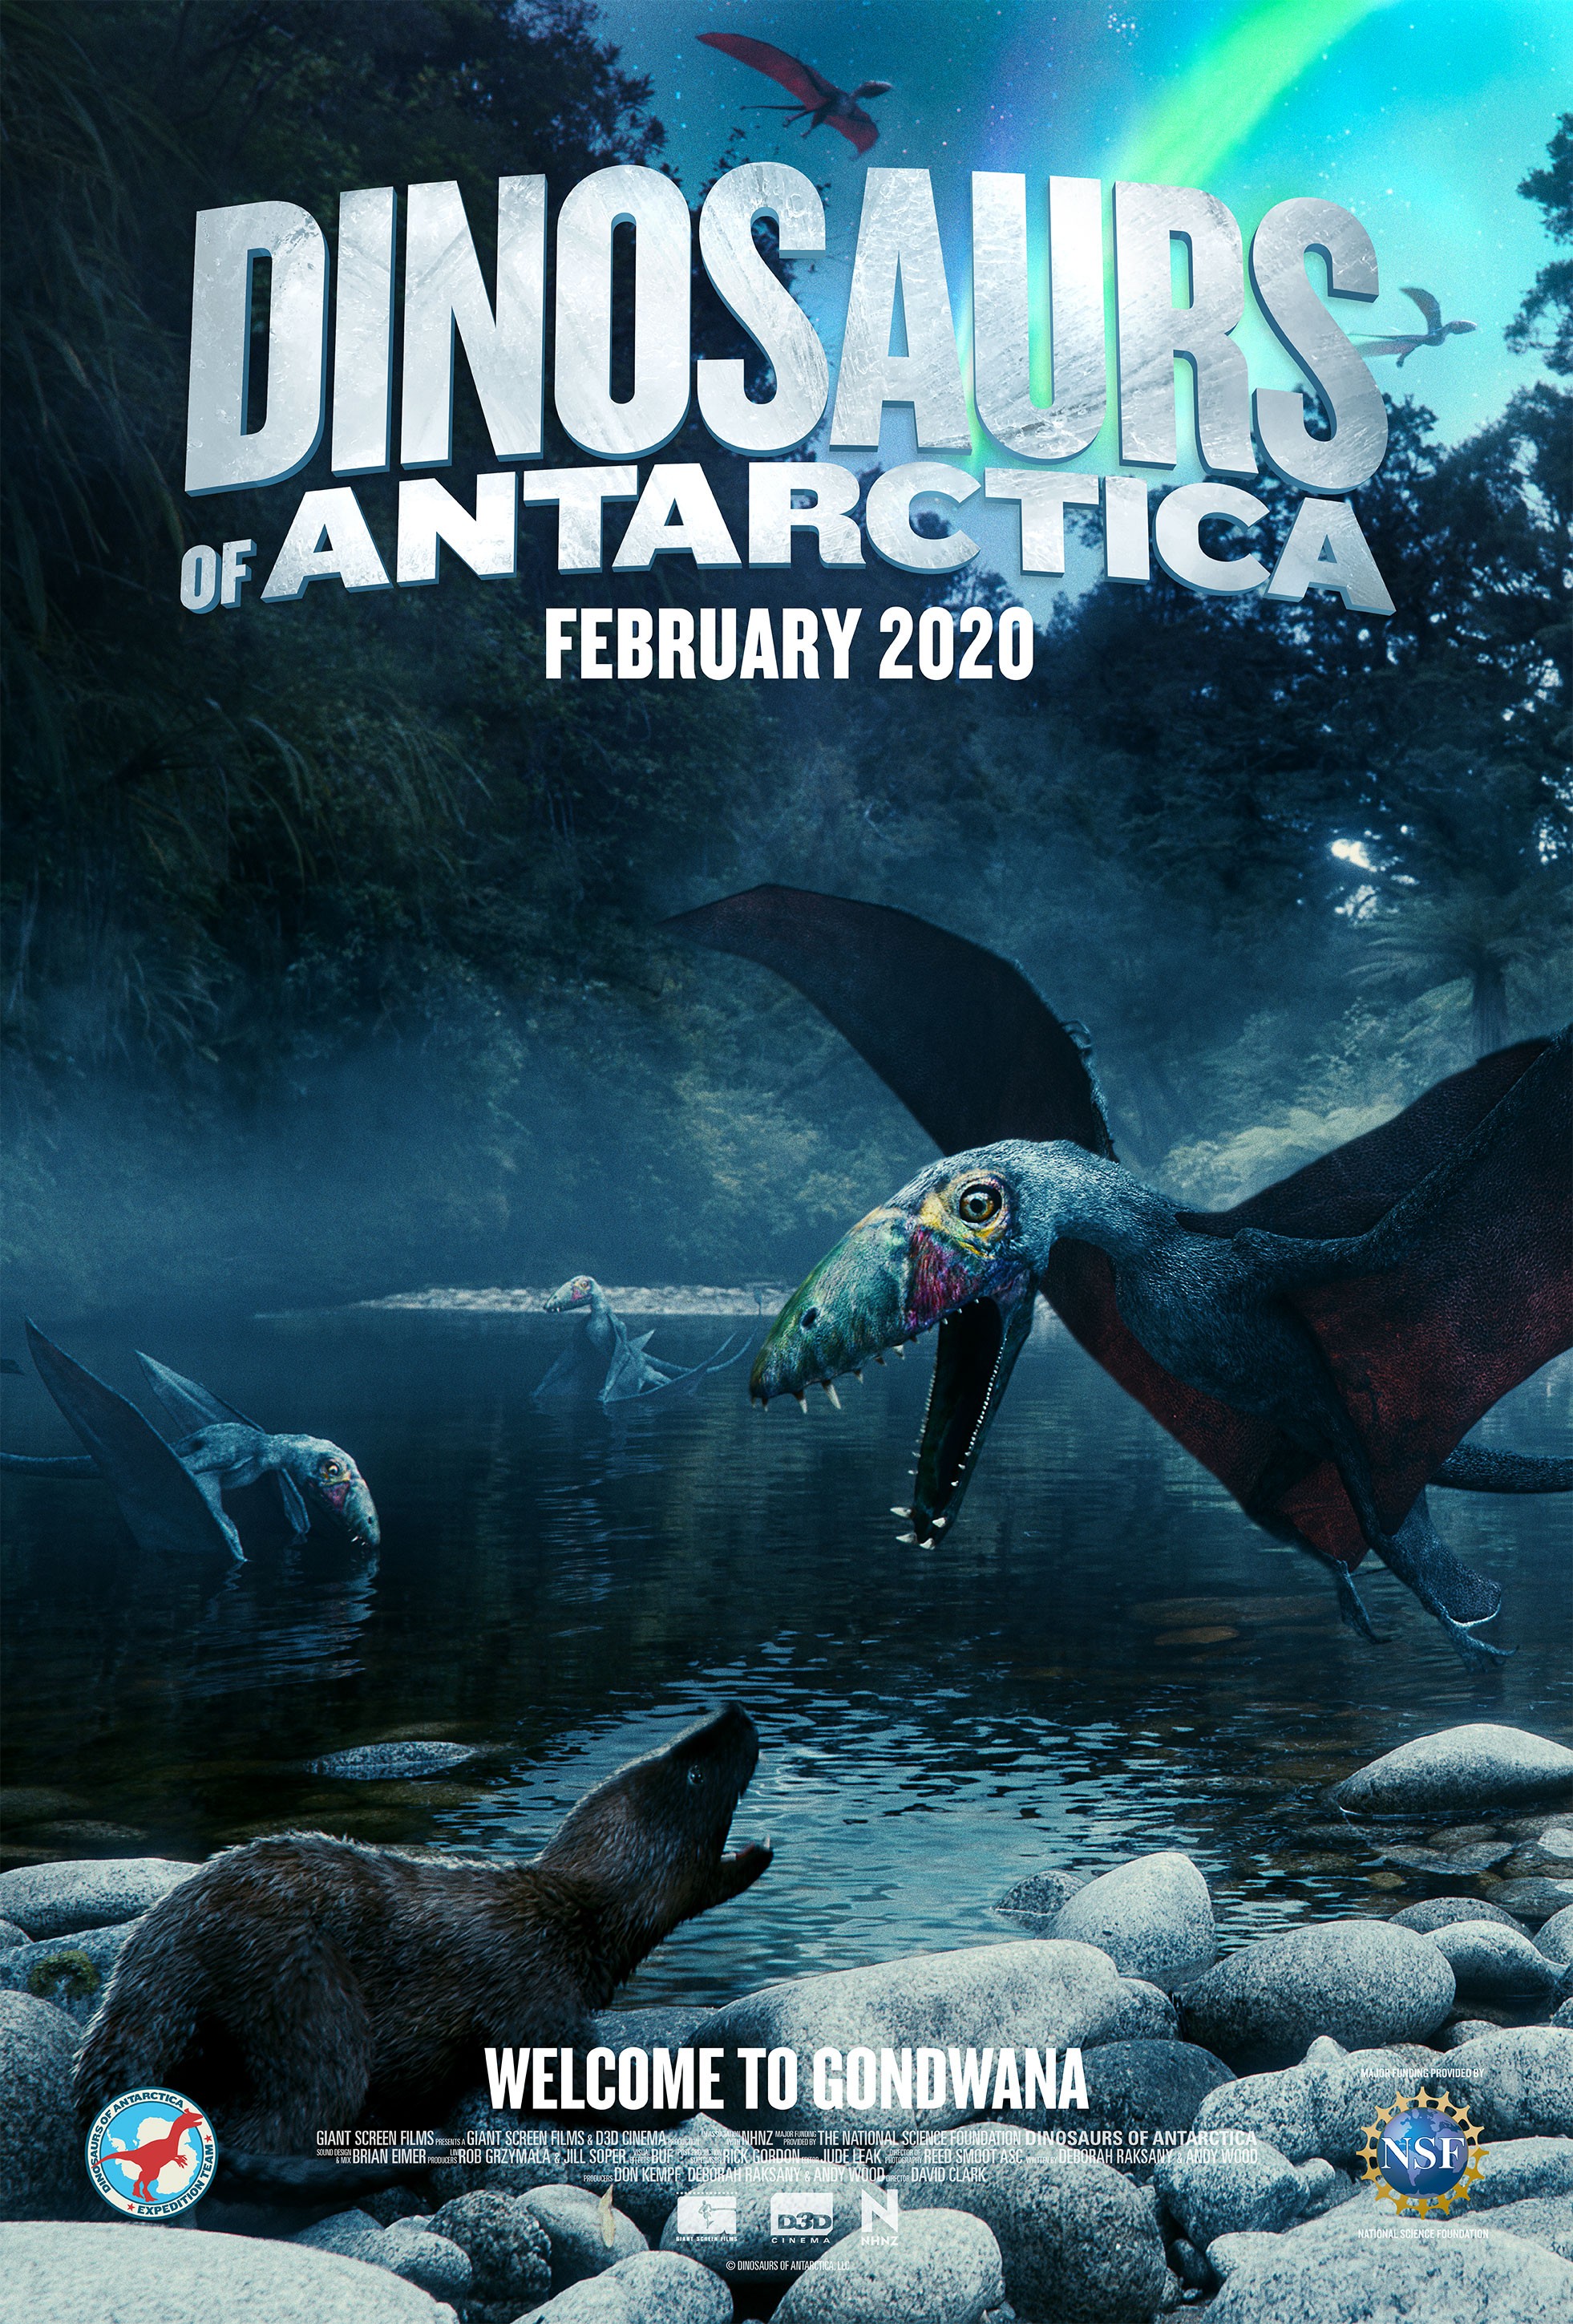 Mega Sized Movie Poster Image for Dinosaurs of Antarctica